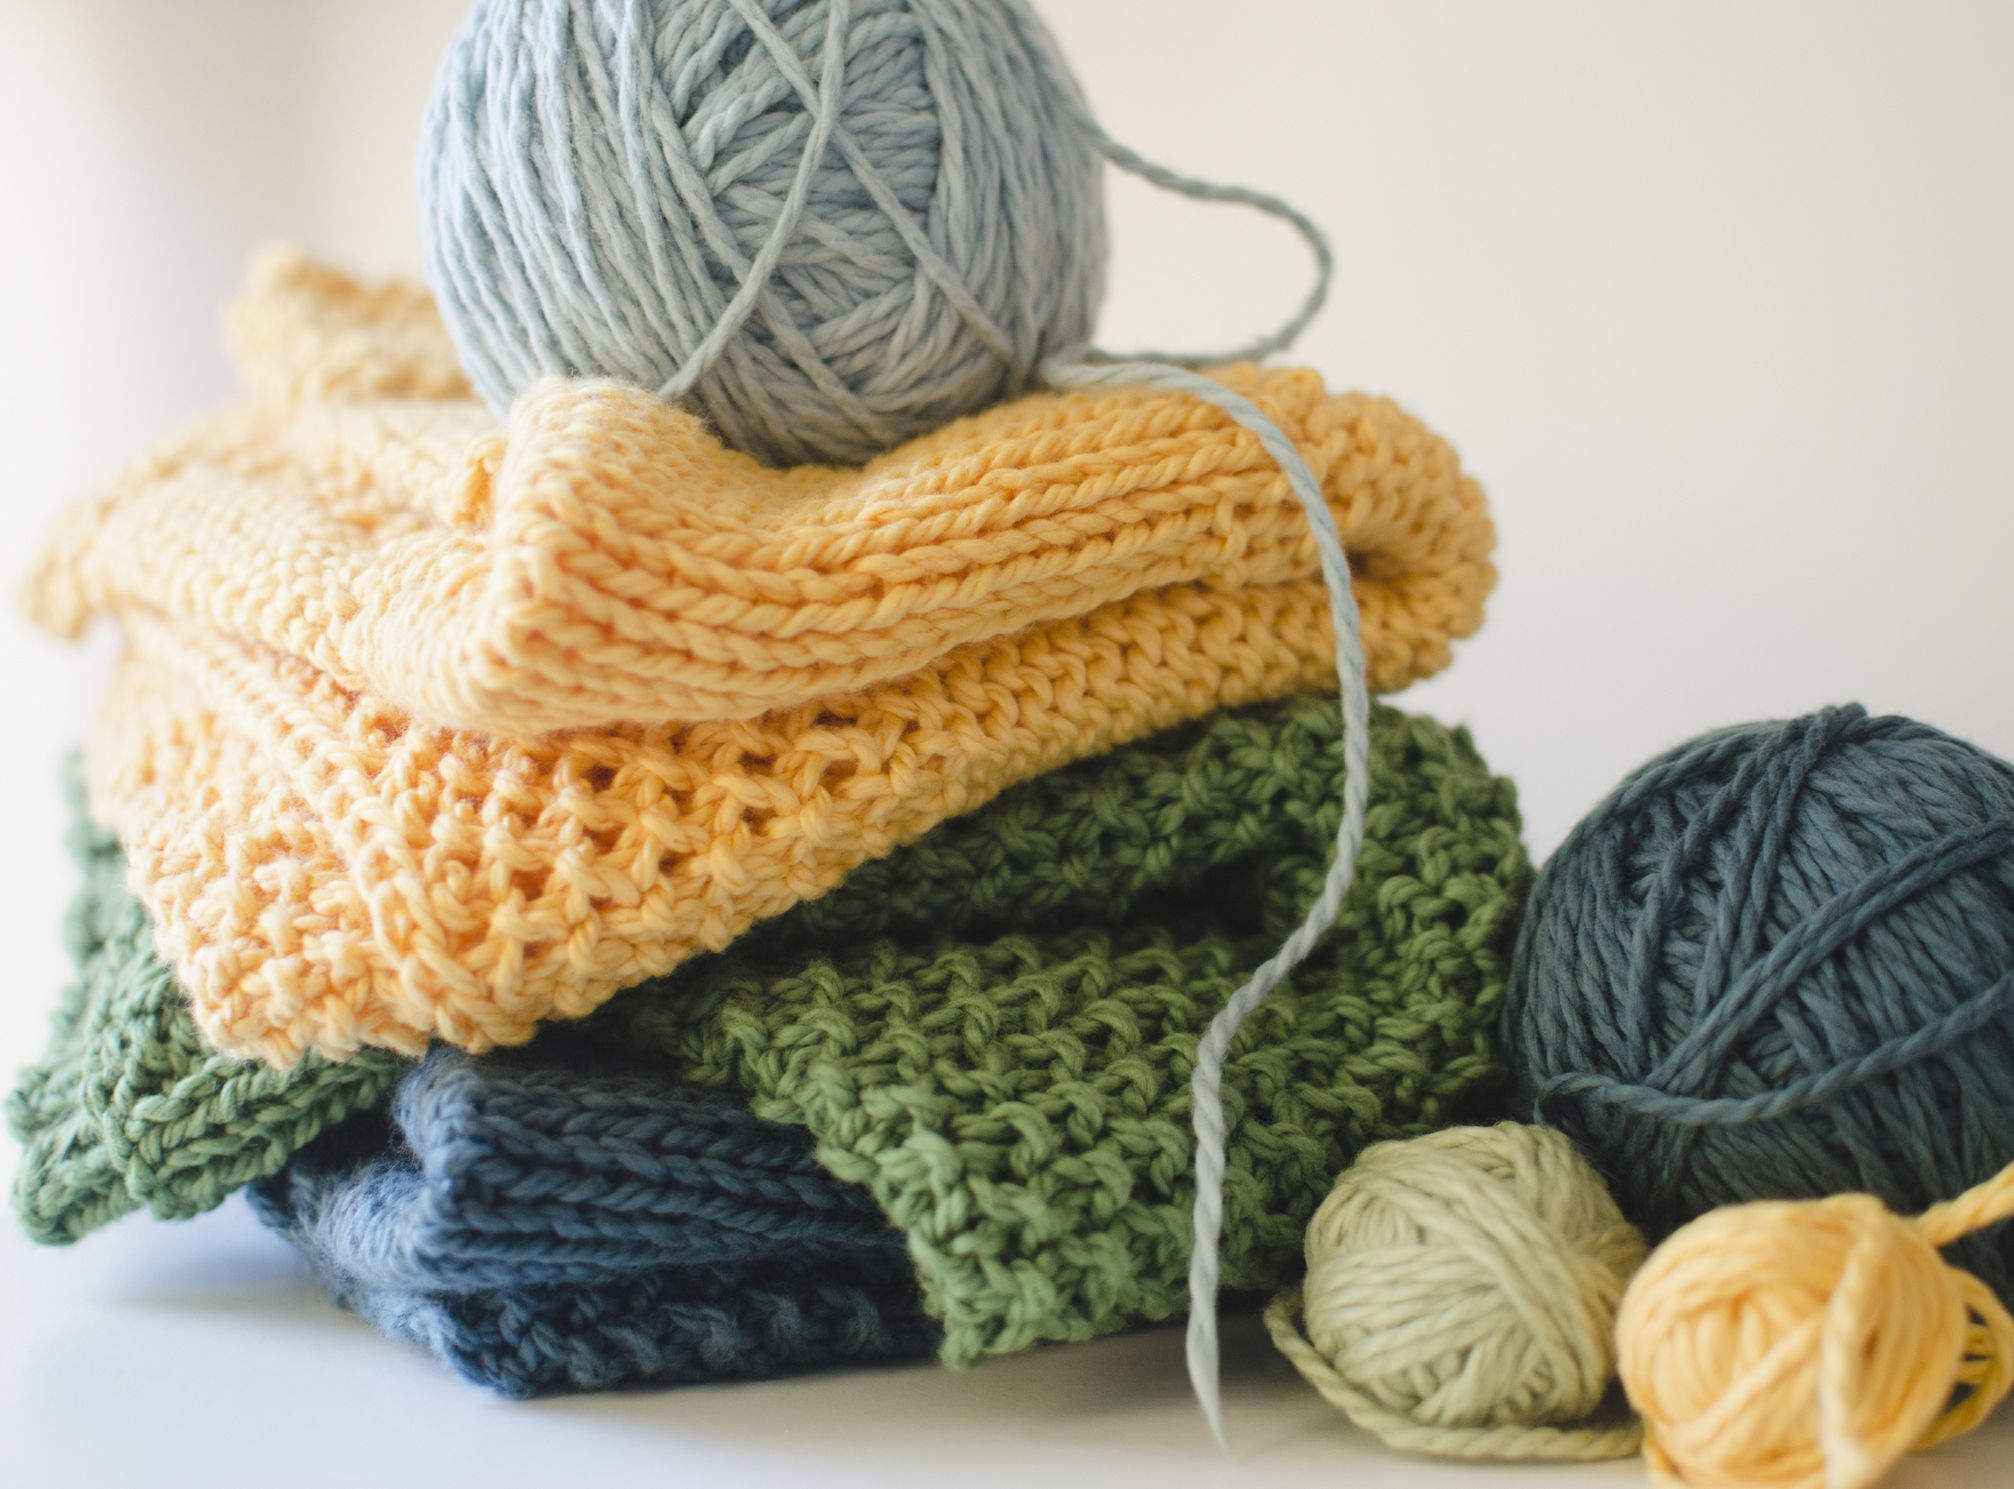 Image of piled knitting projects and yarn.